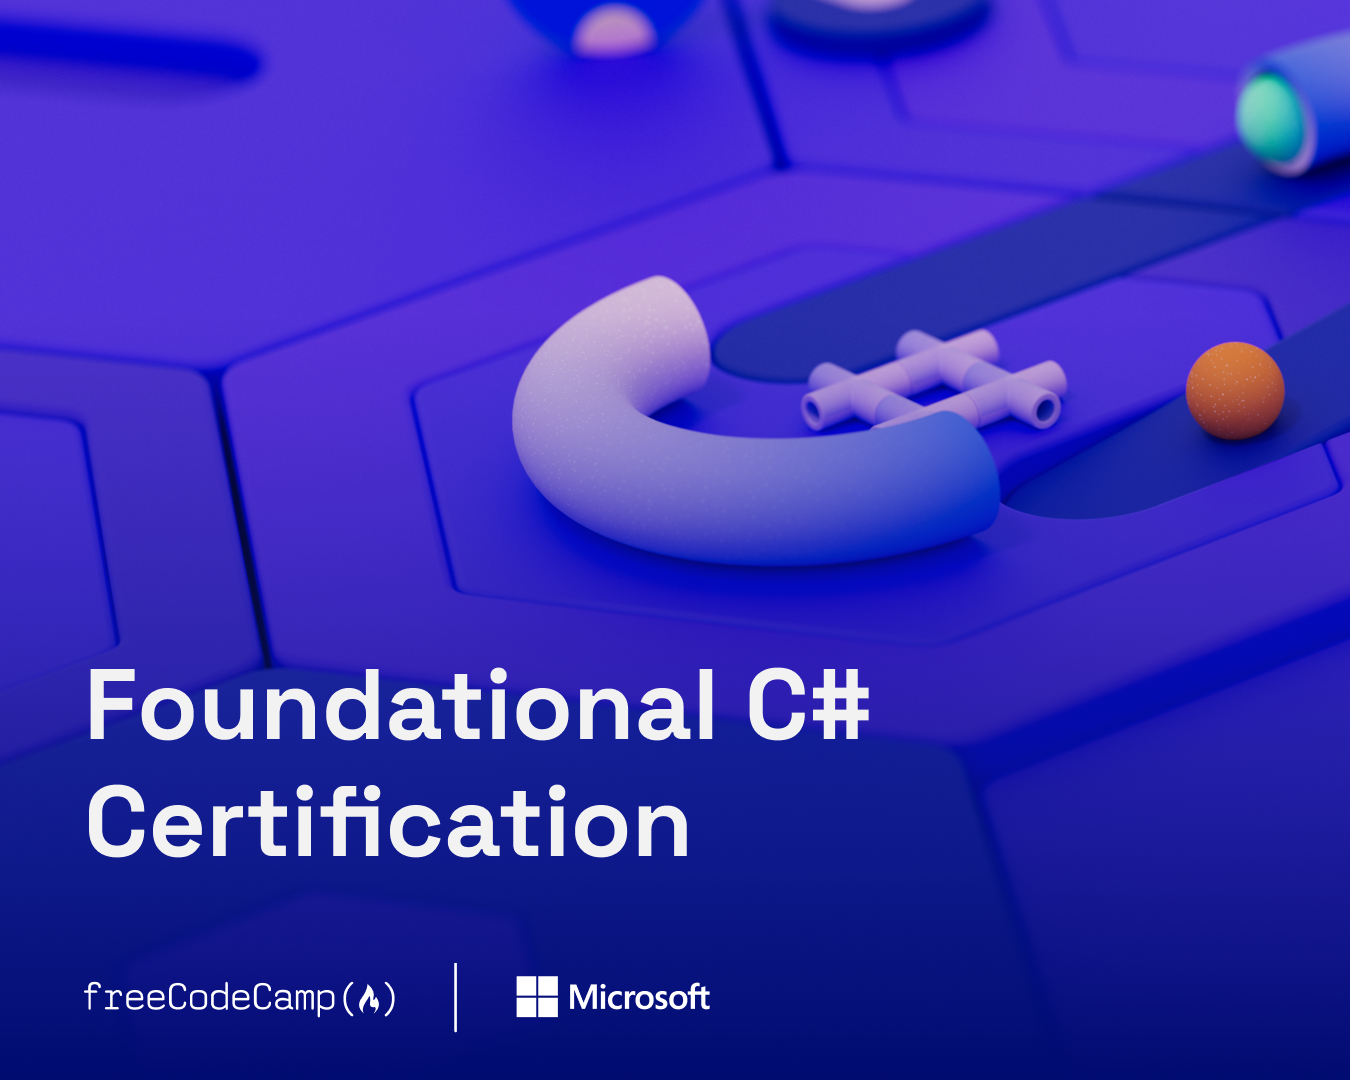 Announcing the New Foundational C# Certification with freeCodeCamp - .NET Blog